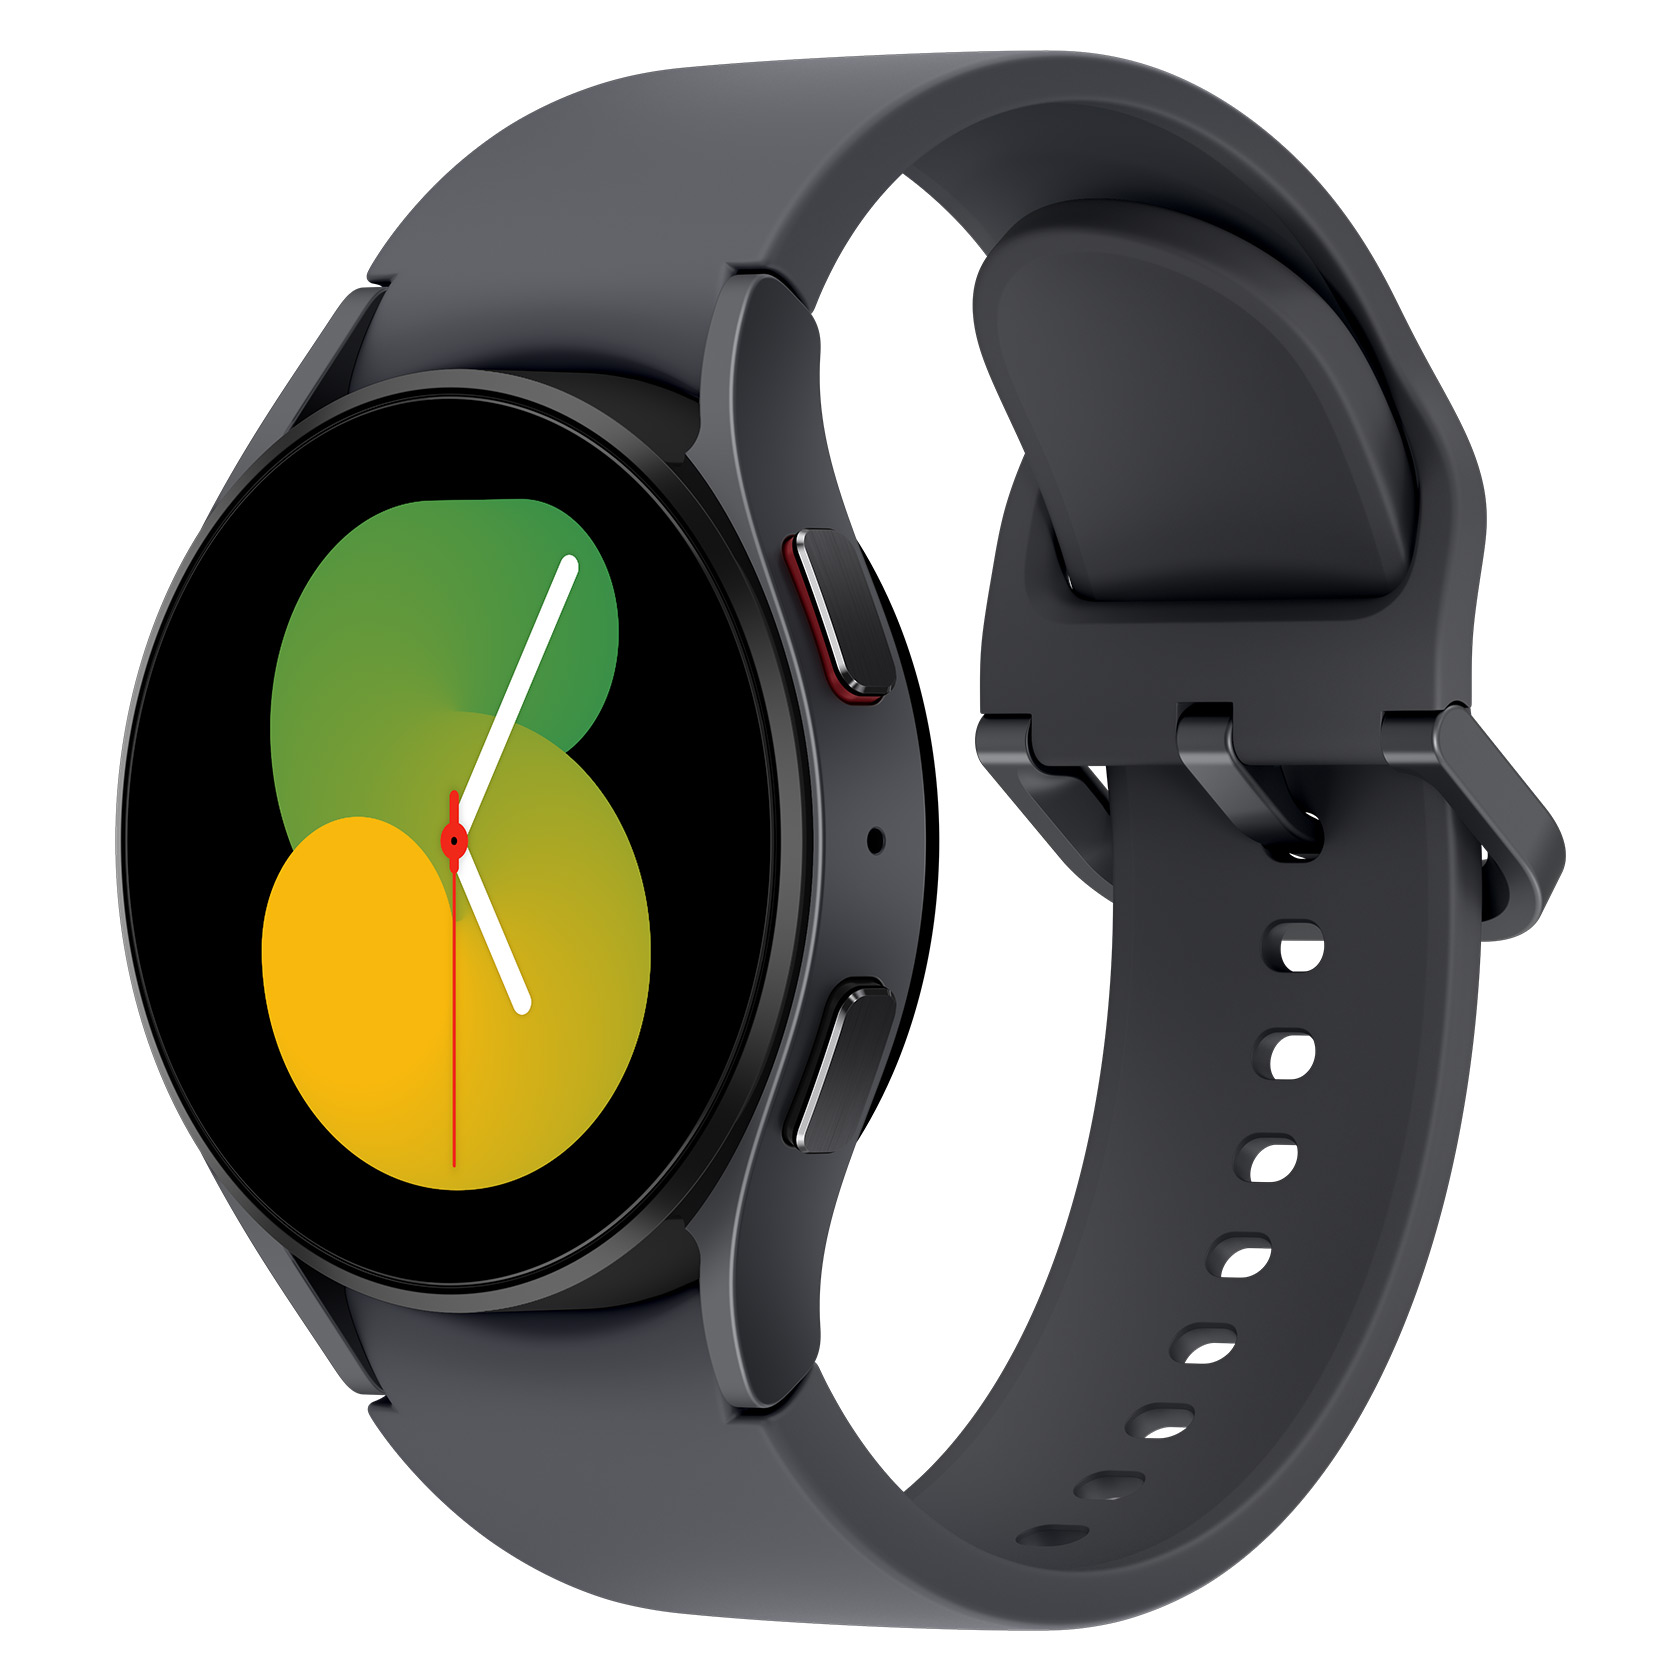 Samsung Offer Program: 40mm Galaxy Watch5 w/ Trade In of Most Smartwatches